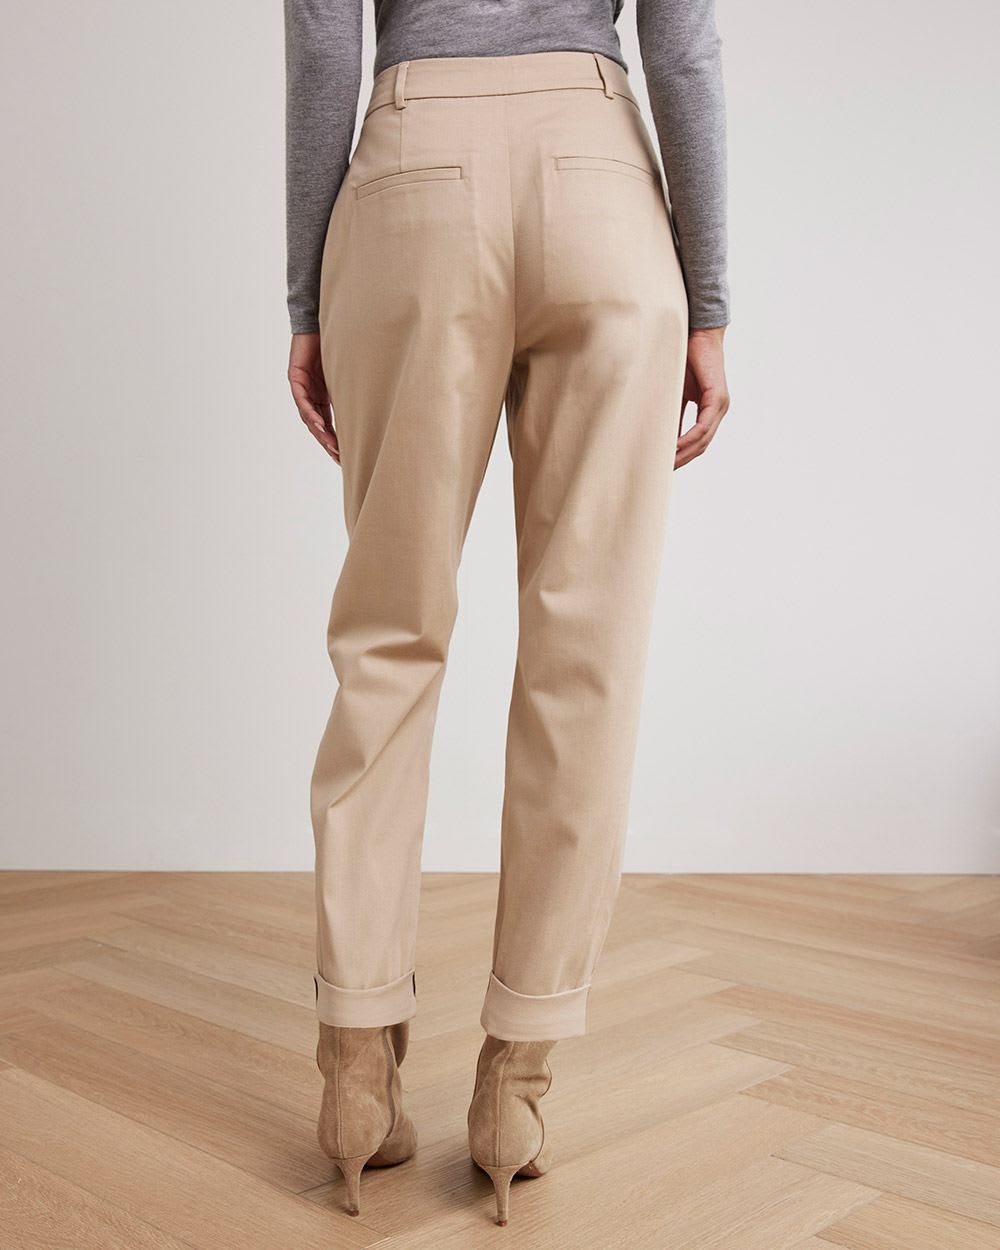 Tapered-Leg High-Rise Chino Pant with Cuffs